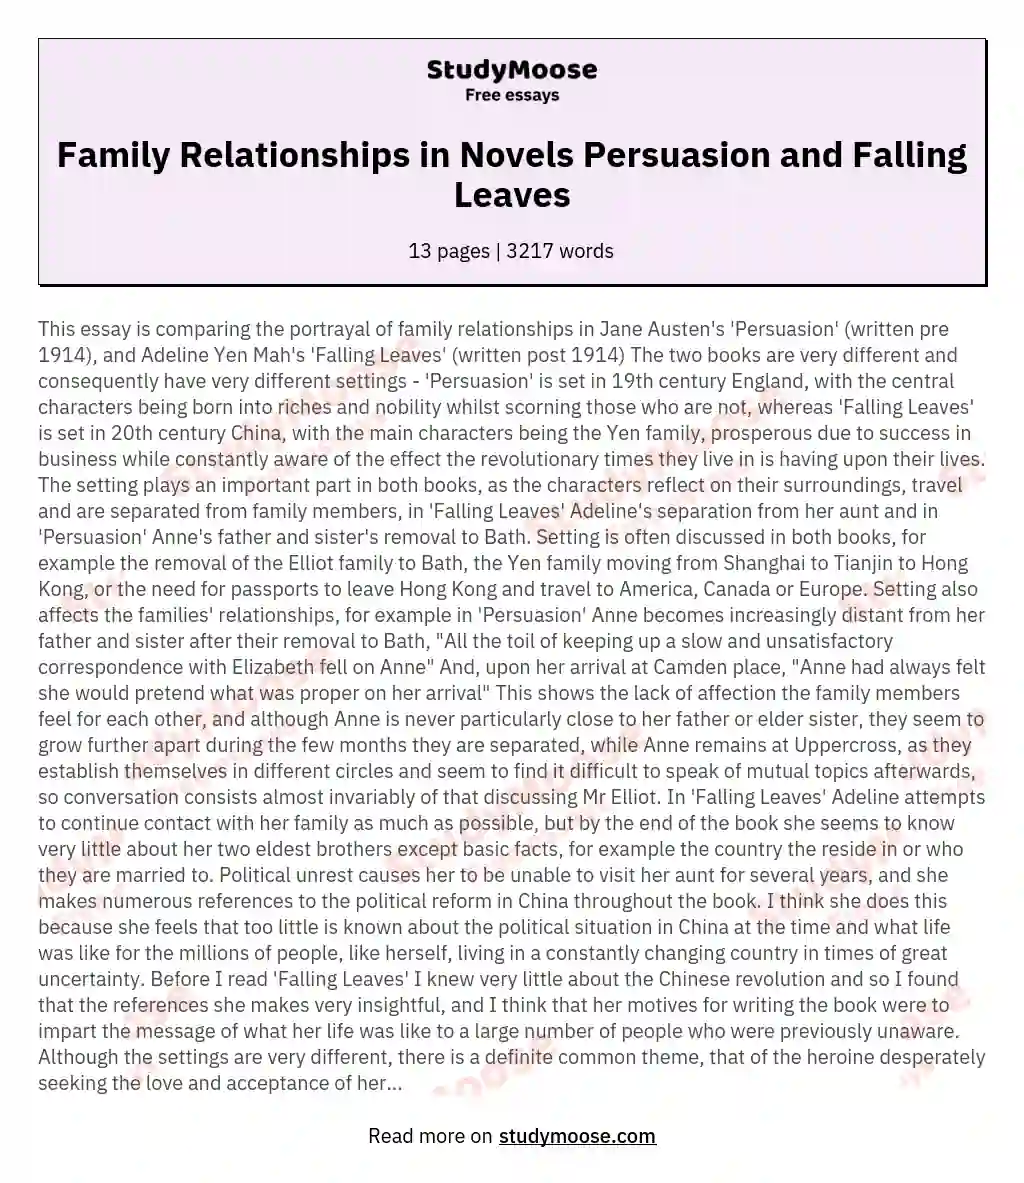 Family Relationships in Novels Persuasion and Falling Leaves essay